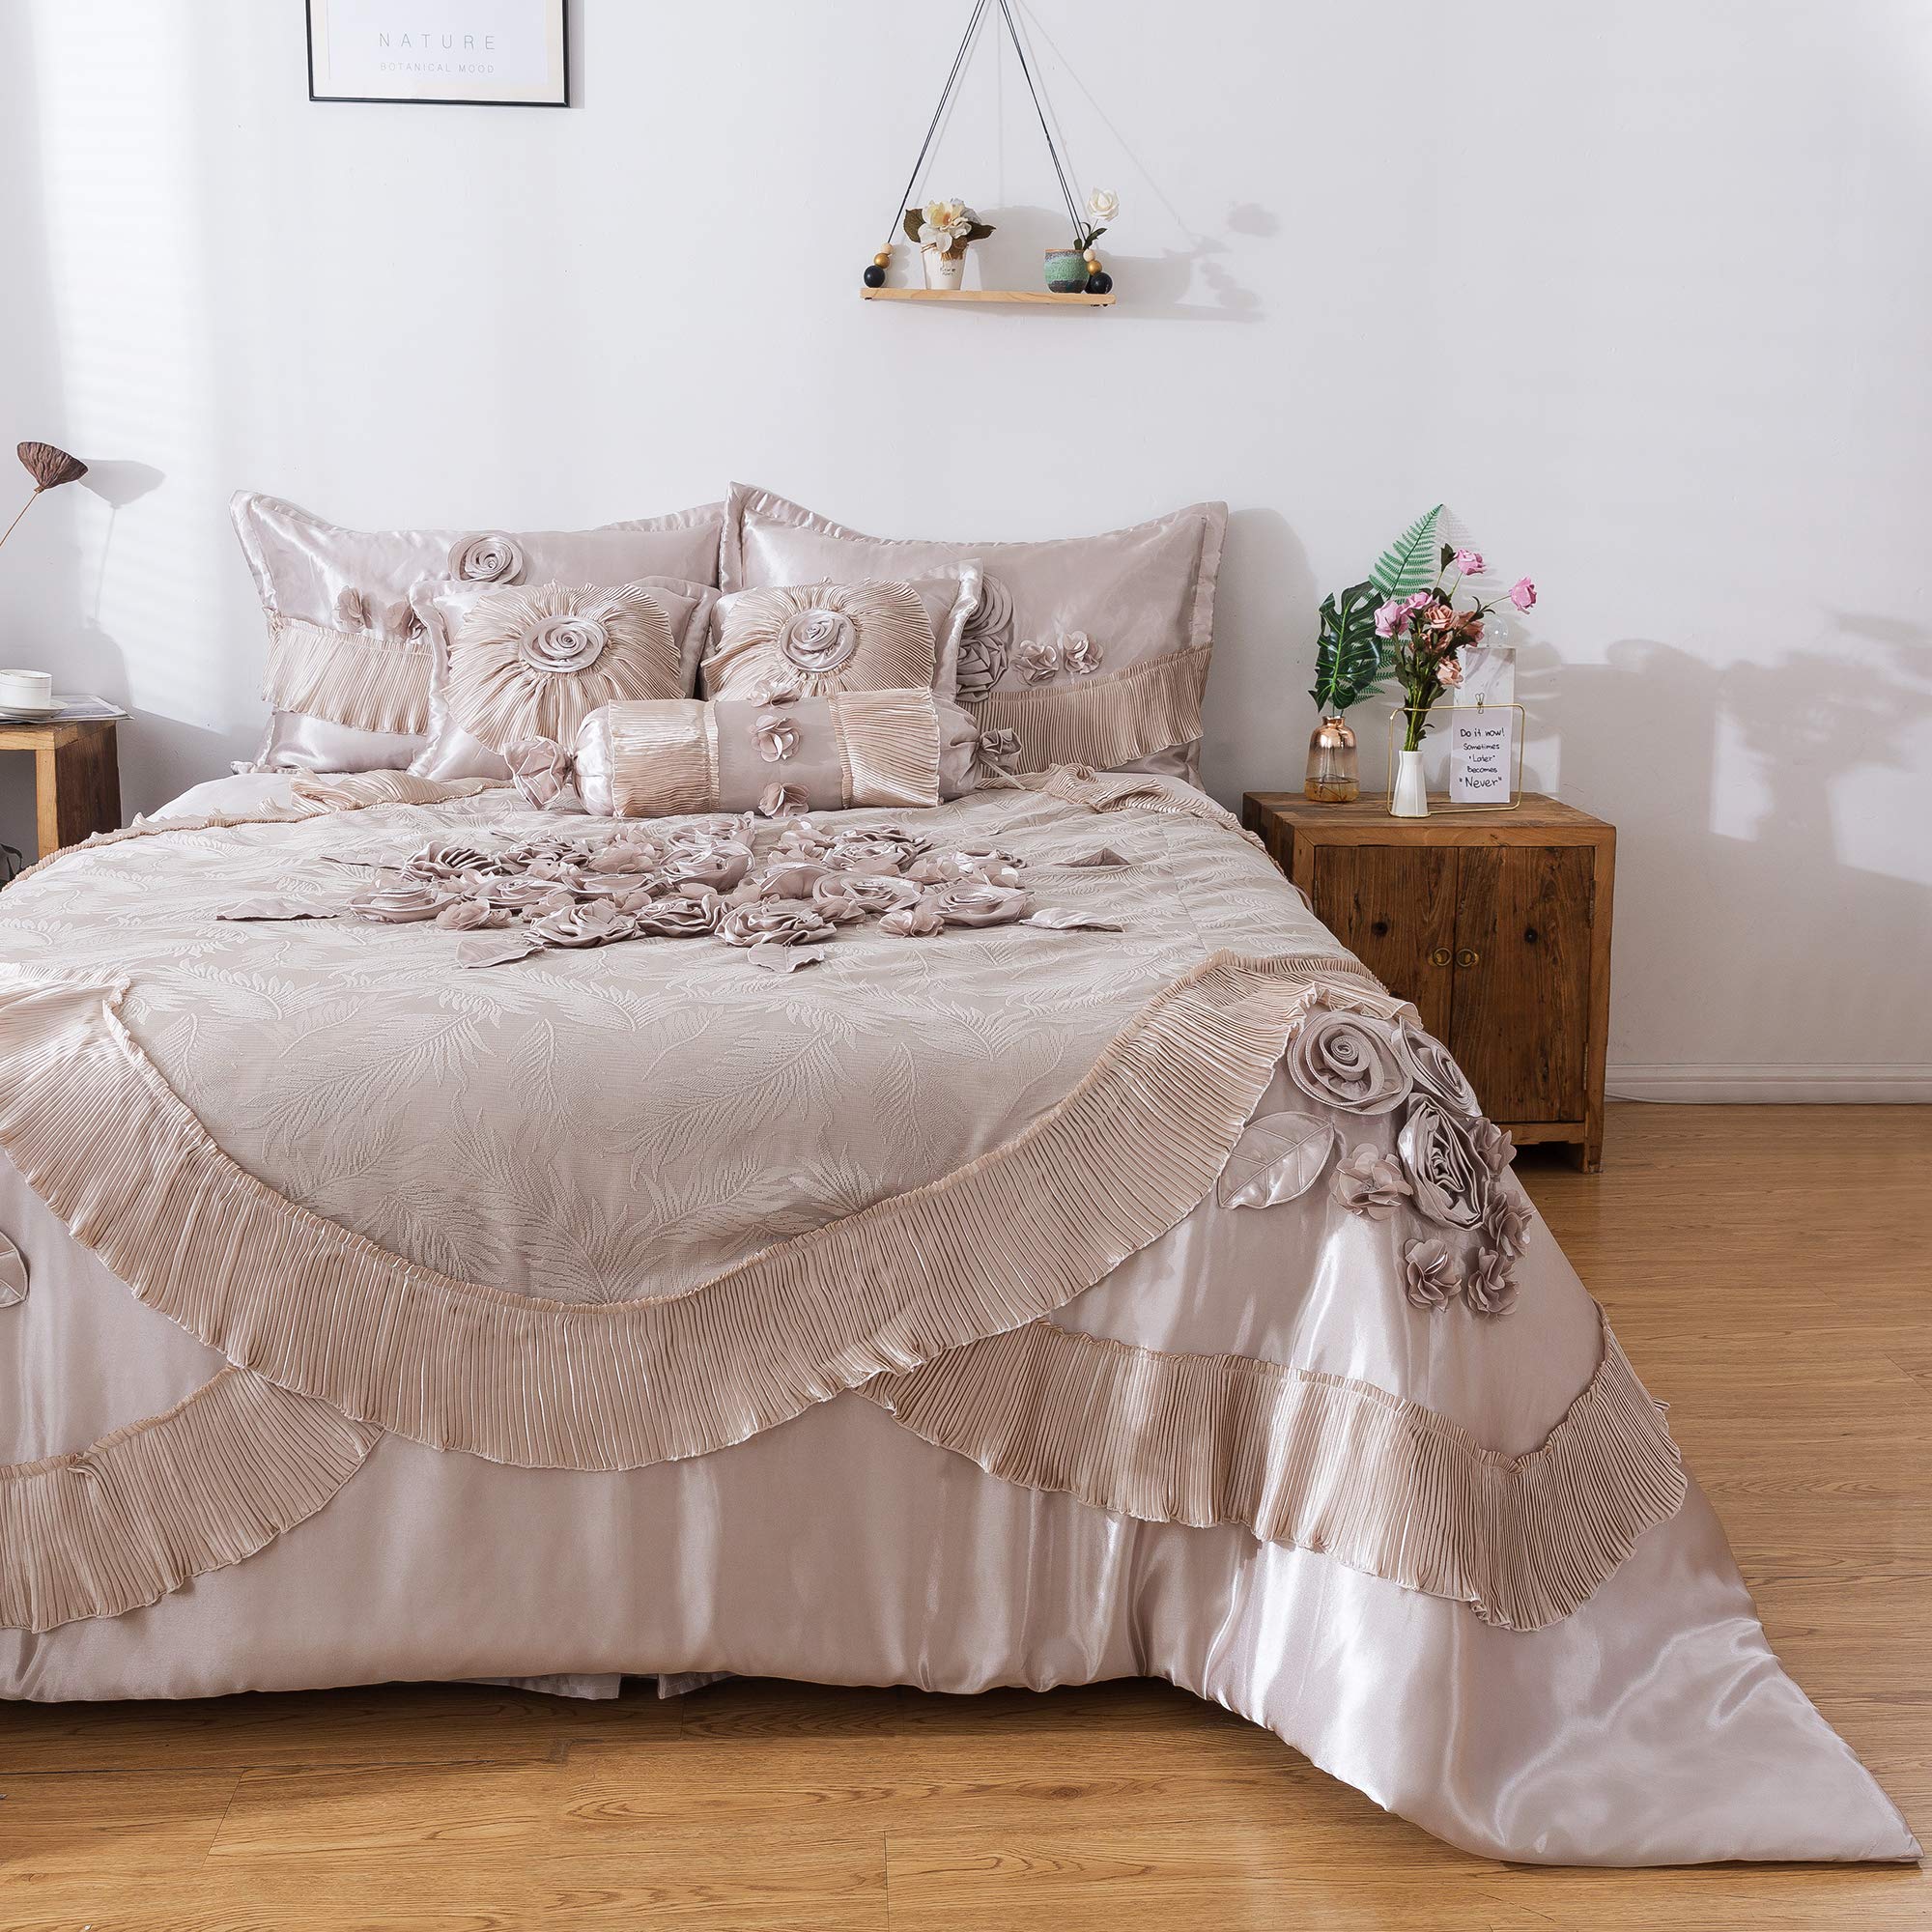 elegant champagne beige satin faux silk comforter set with accessories. click to view all comforters.